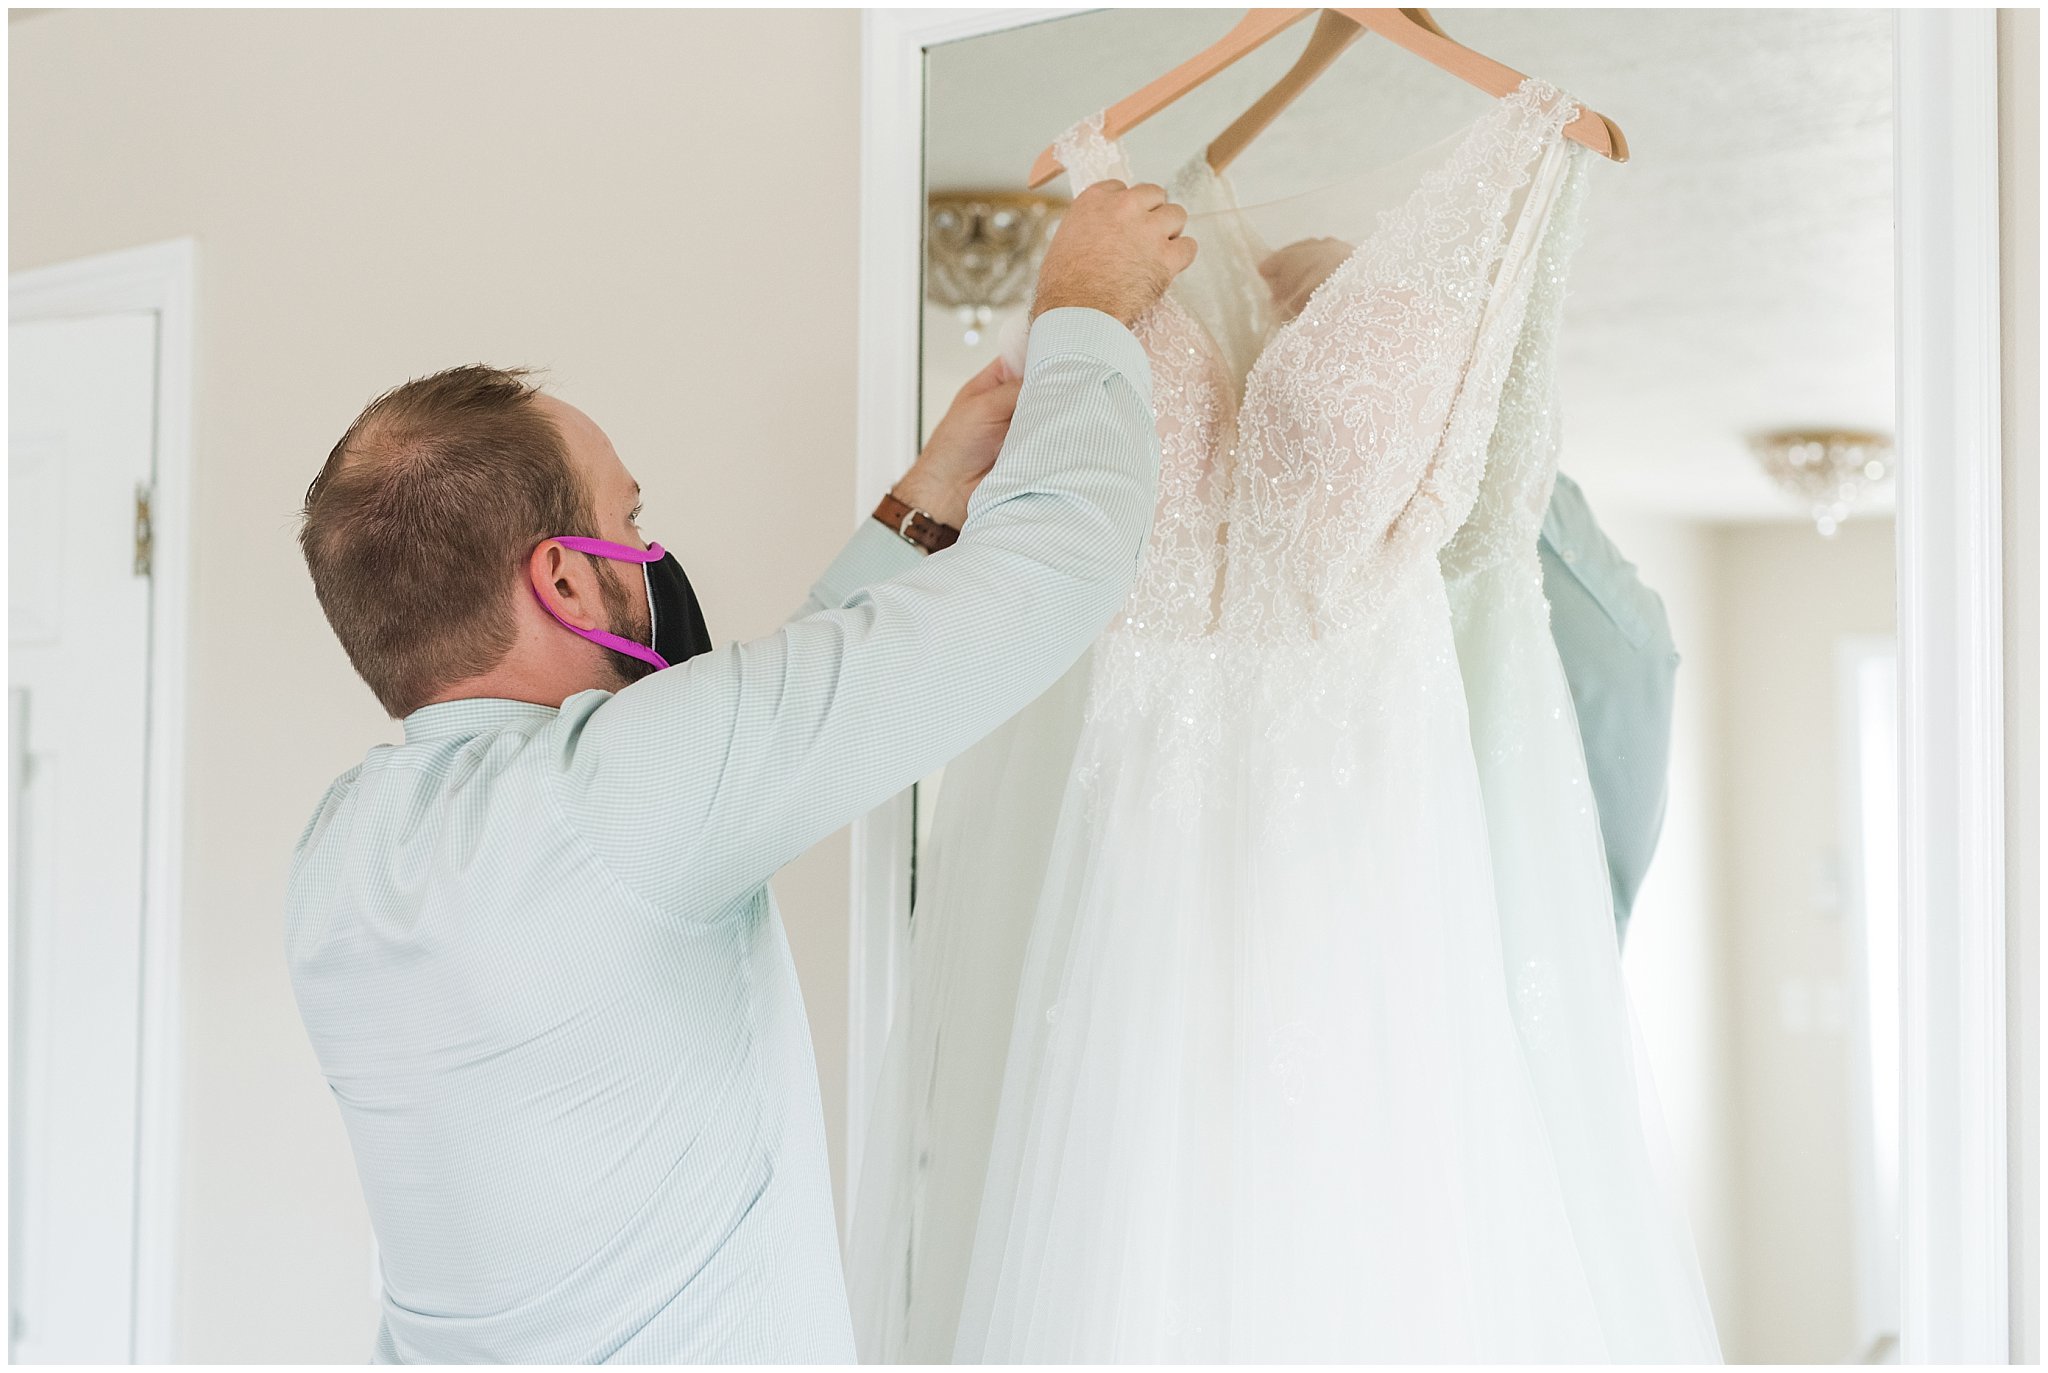 Dallin fixing wedding dress and tossing veils